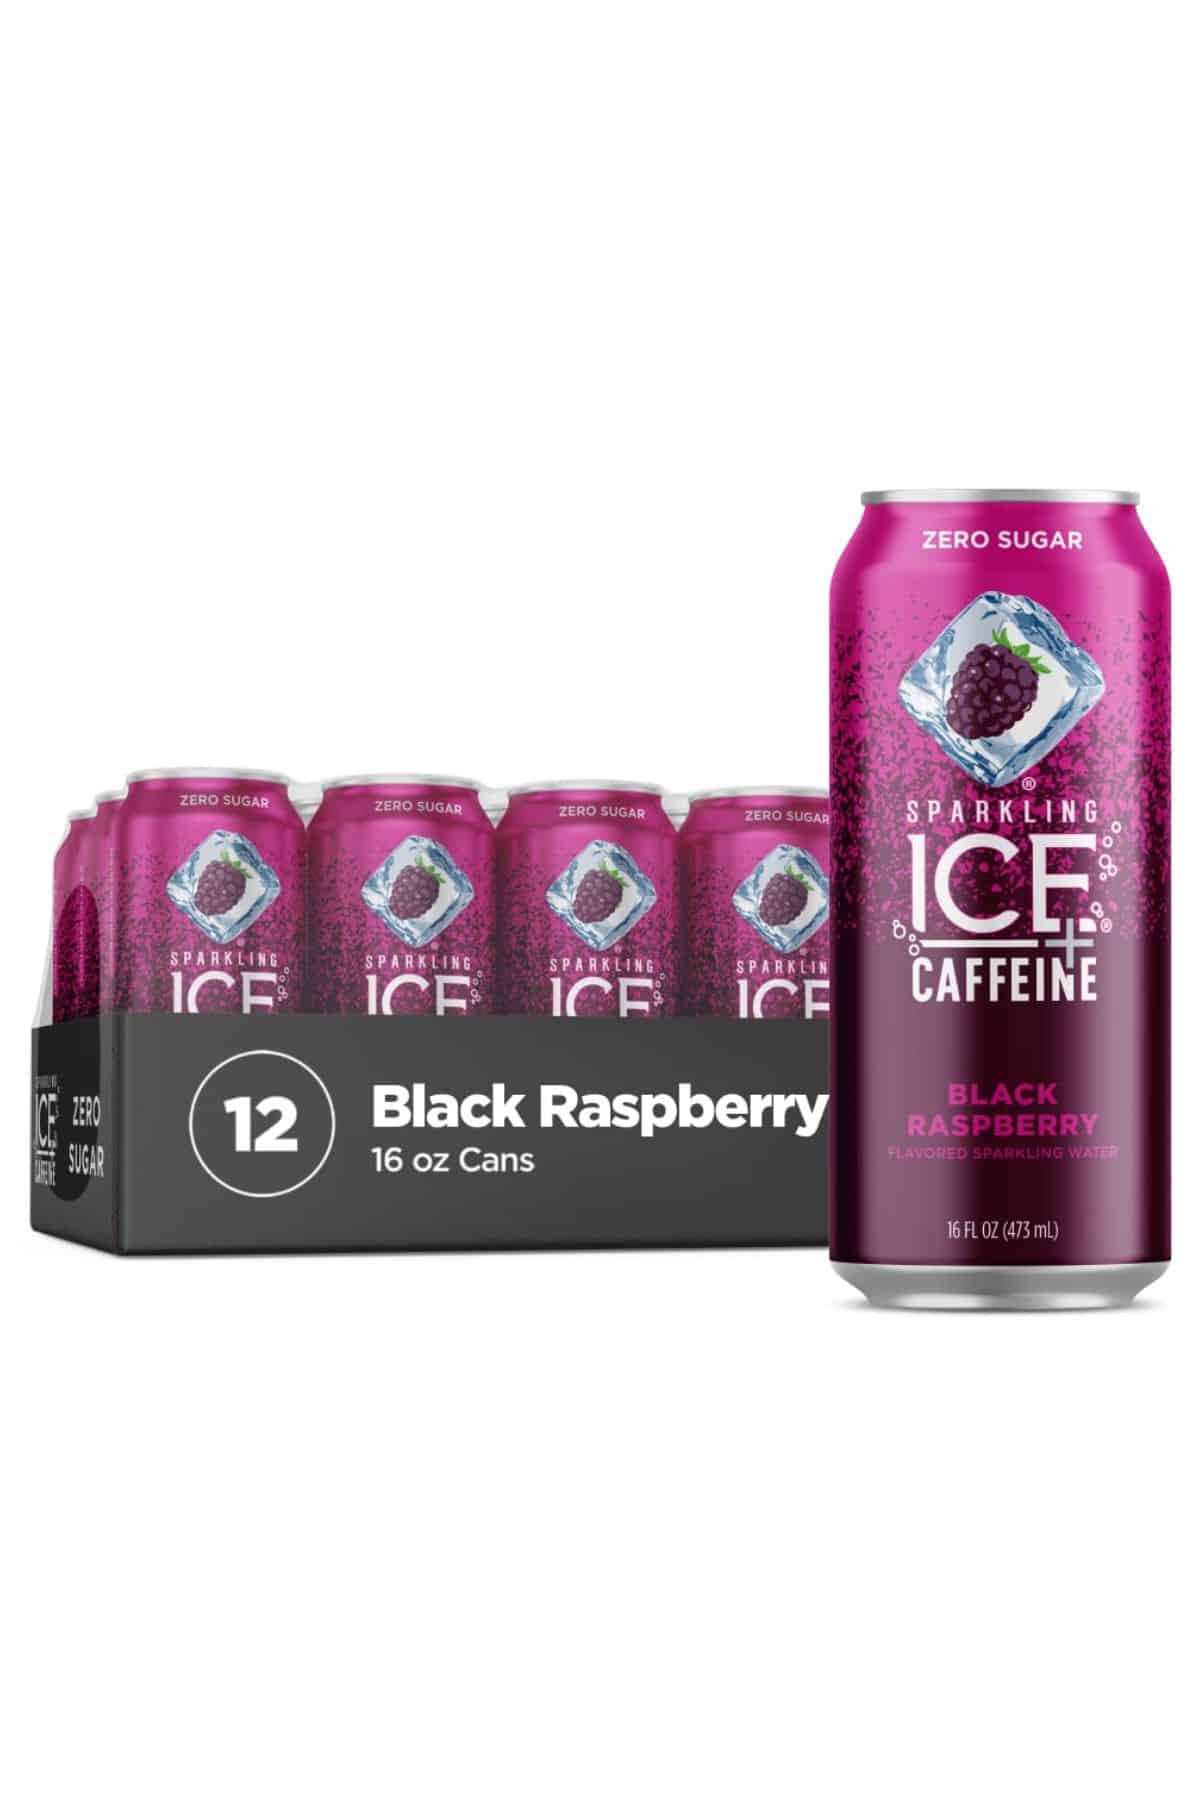 a 12 pack of Sparkling Ice Black Raspberry next to a single can of the drink.